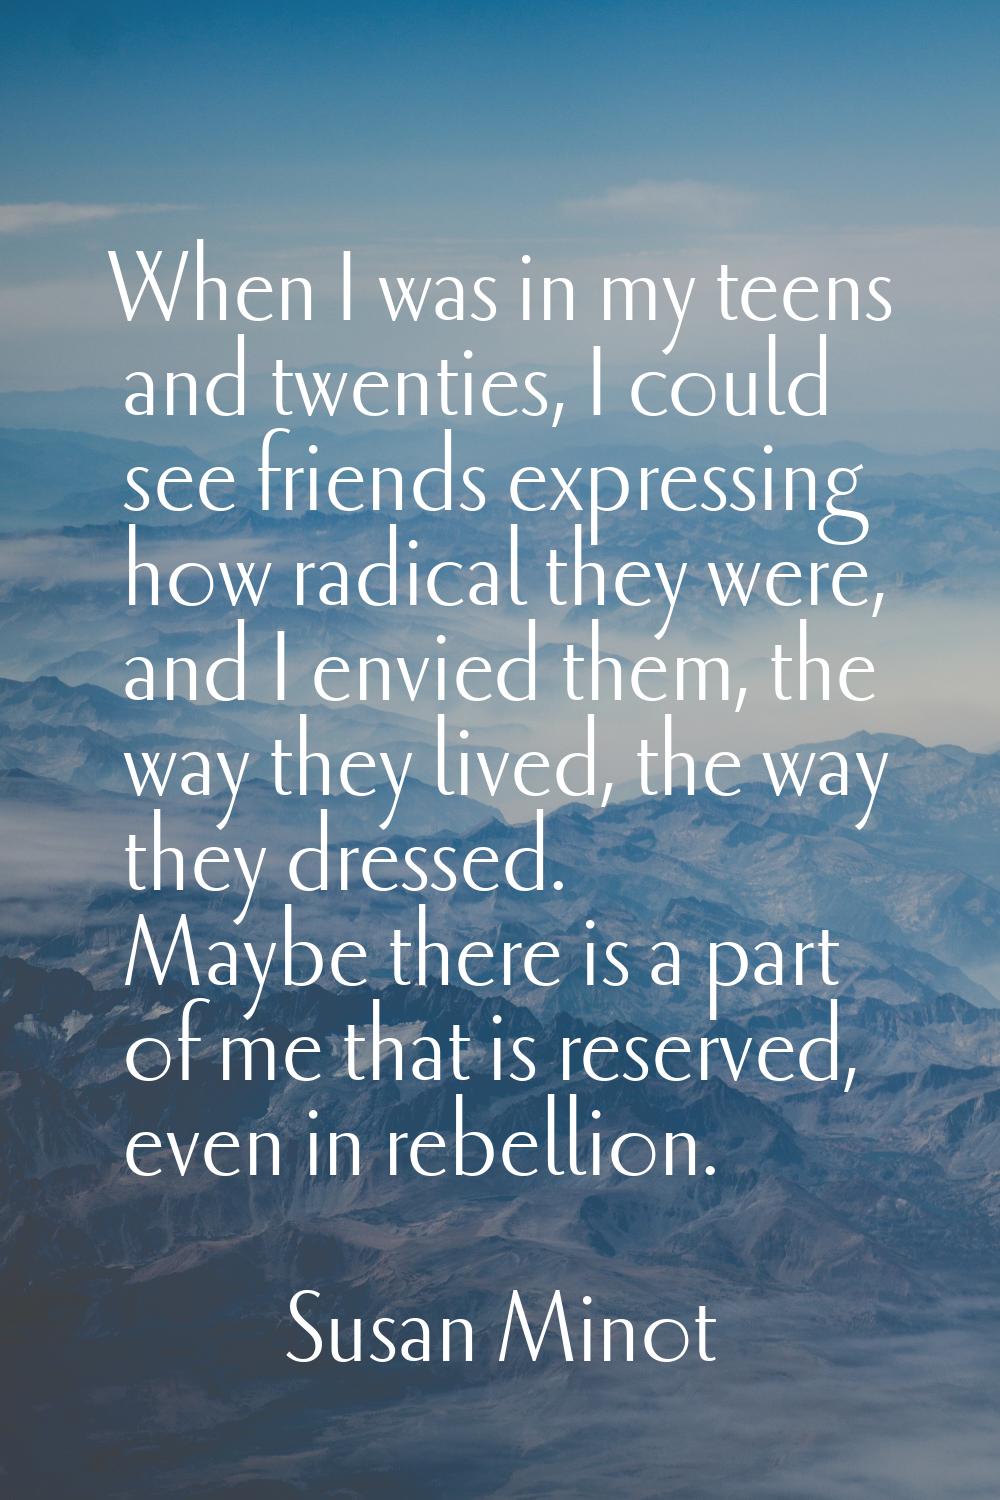 When I was in my teens and twenties, I could see friends expressing how radical they were, and I en